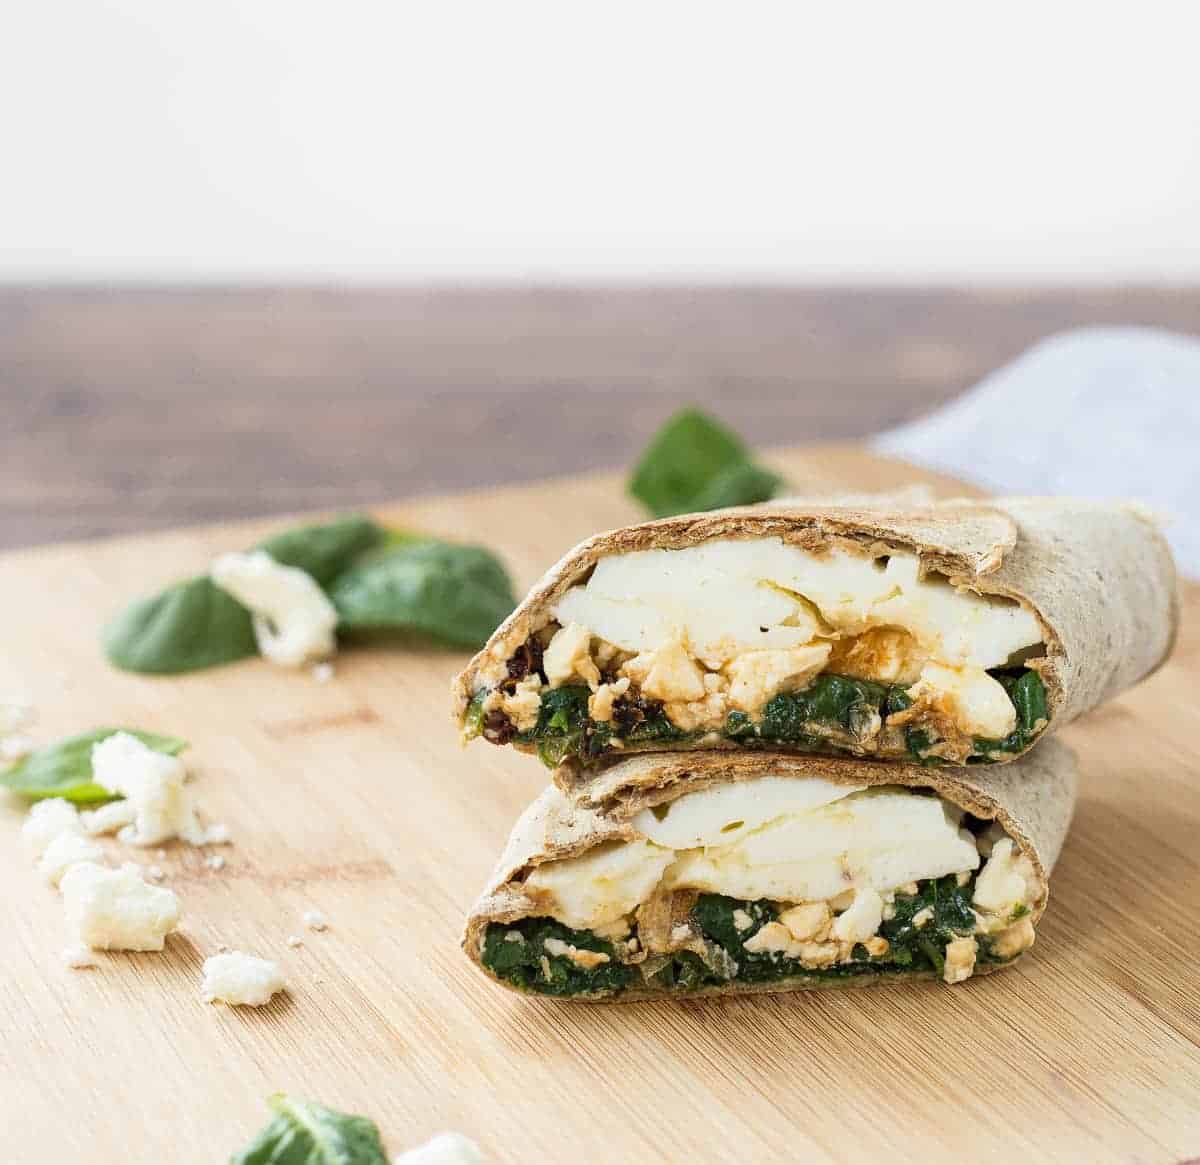 Copycat Starbucks egg white wrap on a wooden surface.